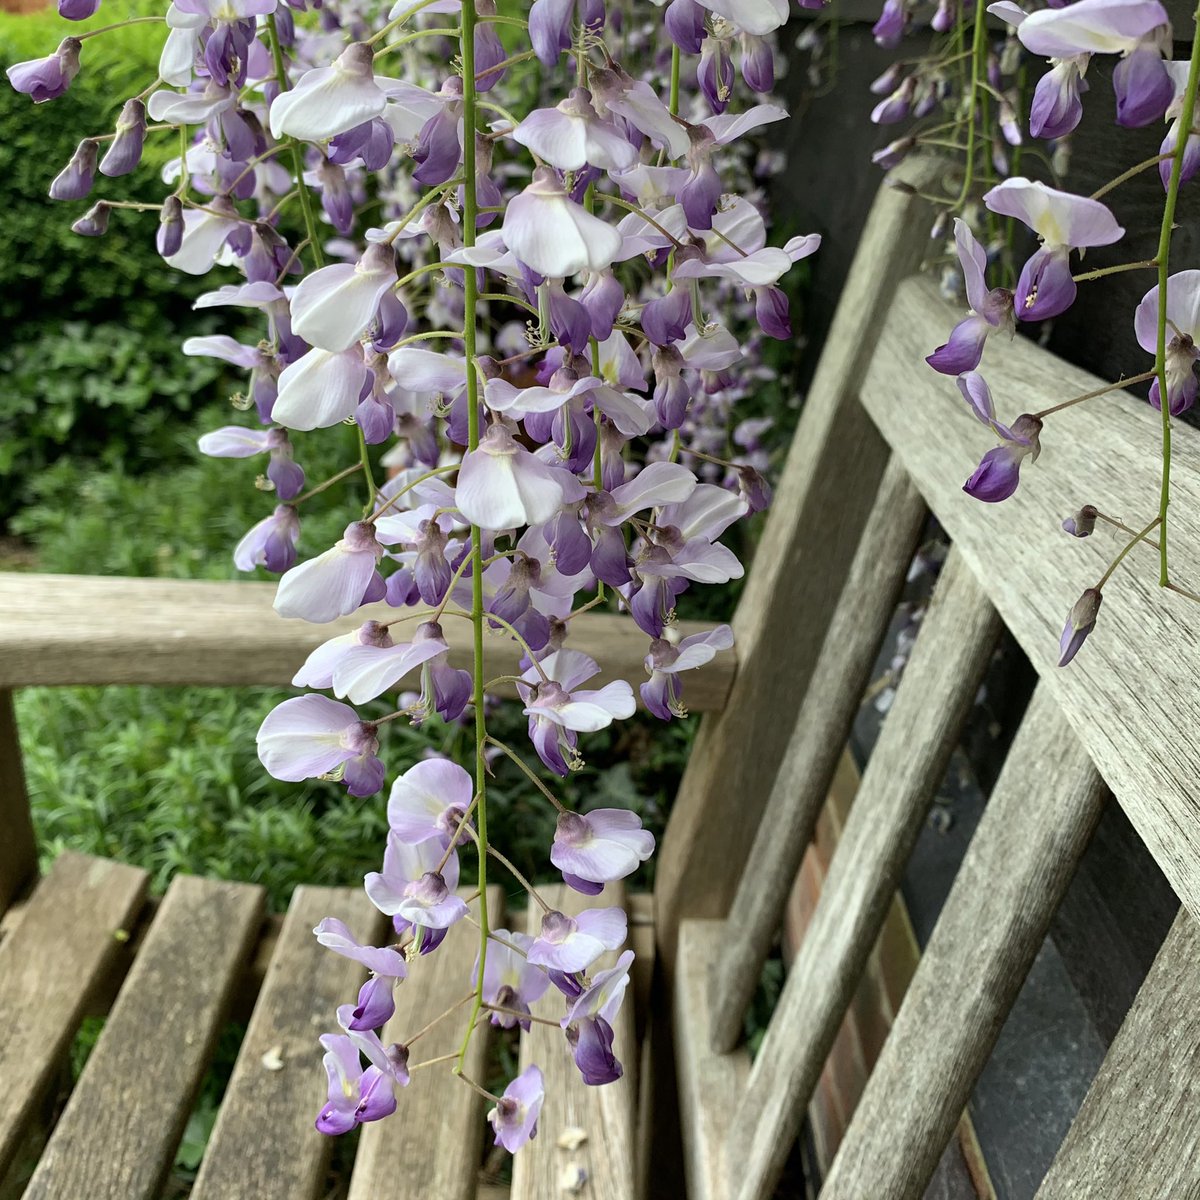 My seat of choice for my gardening coffee break this morning #GardensHour. #wisteriahysteria 💜🌿🤍